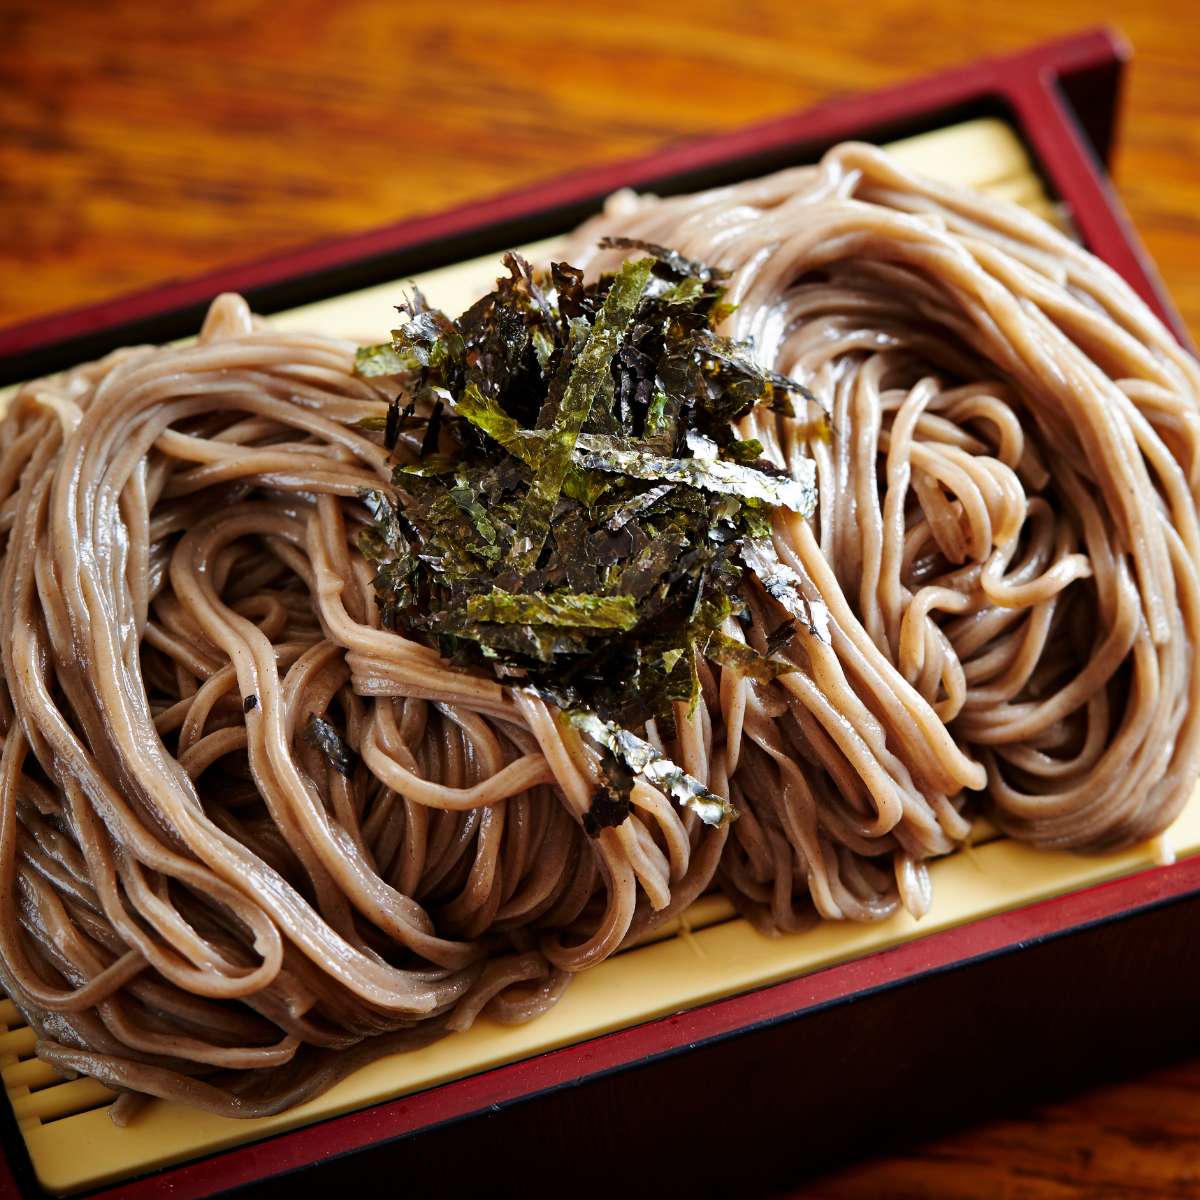 soba noodles topped with greens in a tray on the table
